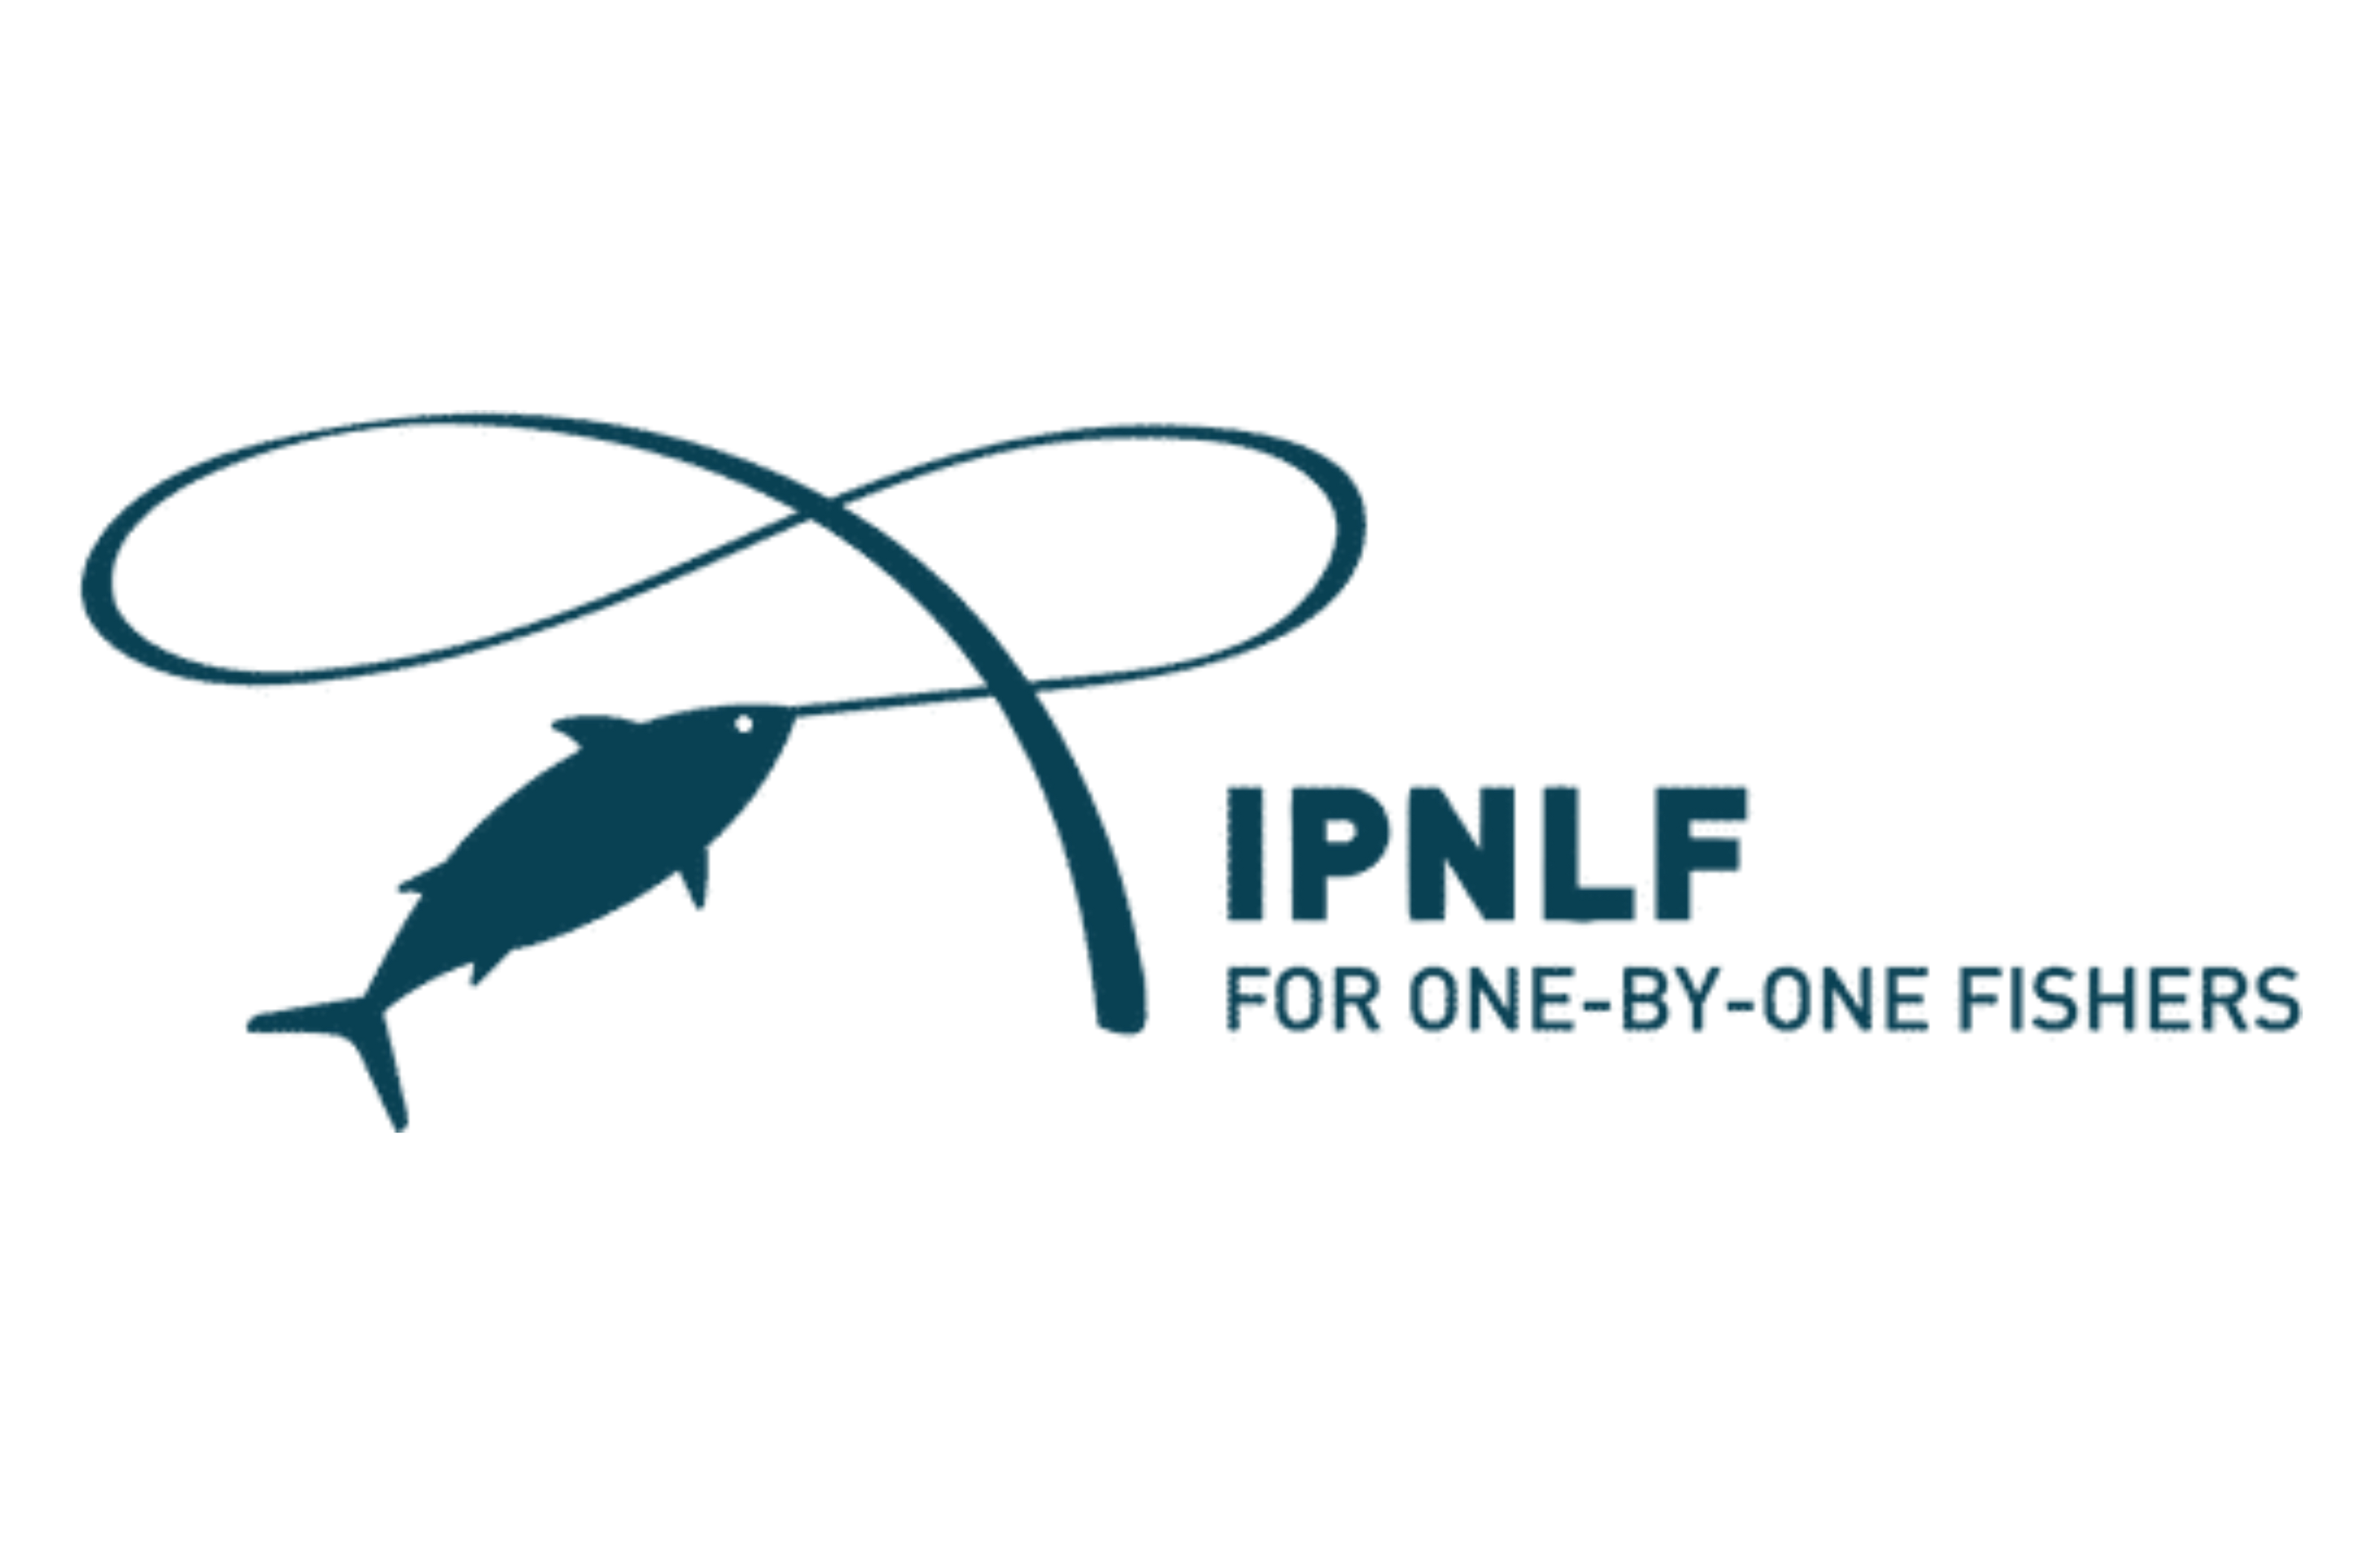 IPNLF ONE BY ONE FISHERS LOGO